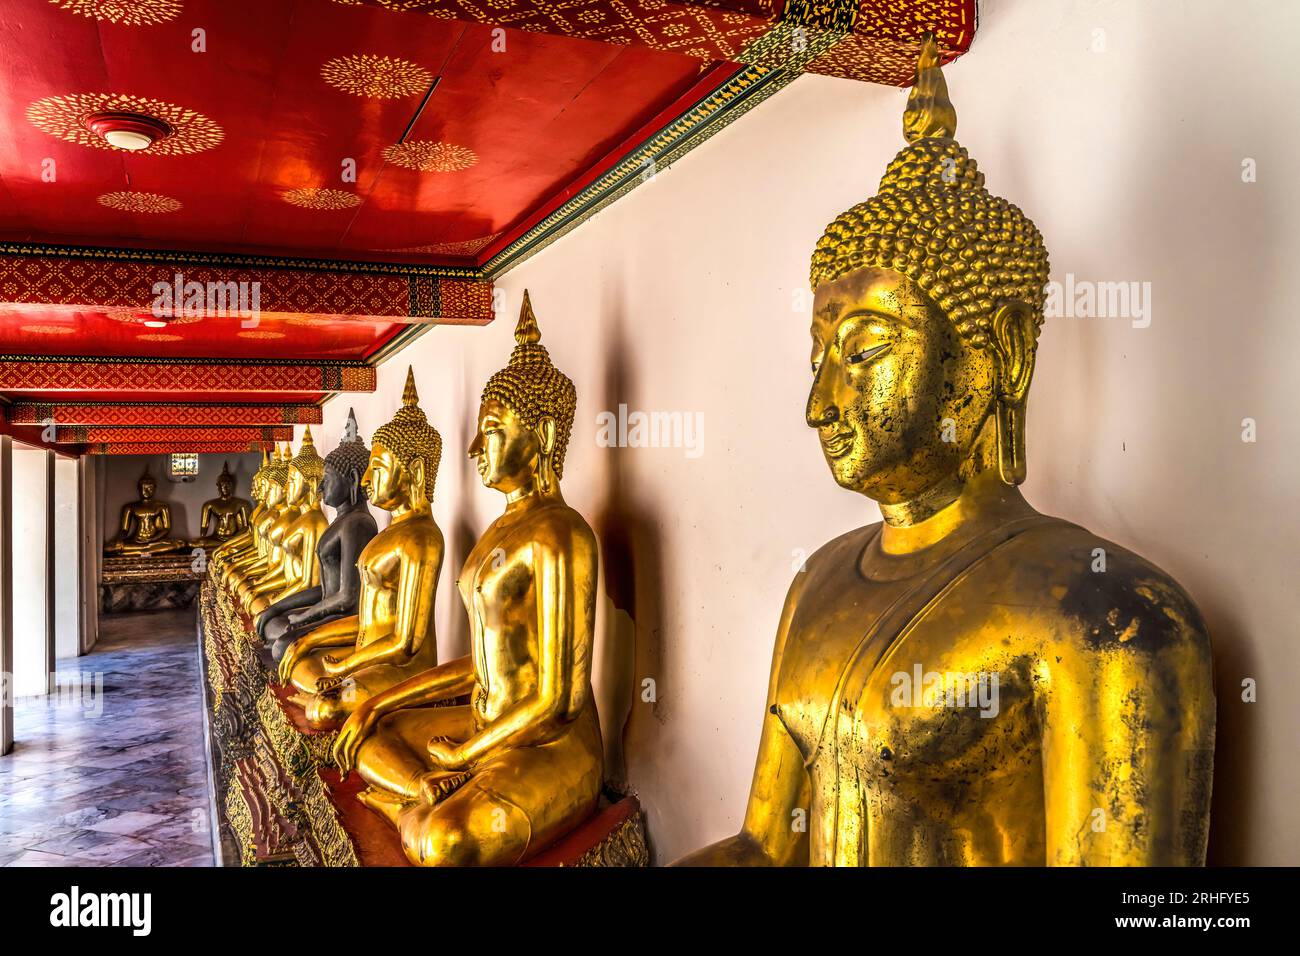 Coloful Golden Buddhas Line Phra Rabiang Wat Pho Po Temple Complex Bangkok Thailand. Temple built in 1600s. Phra contains many historical historical b Stock Photo